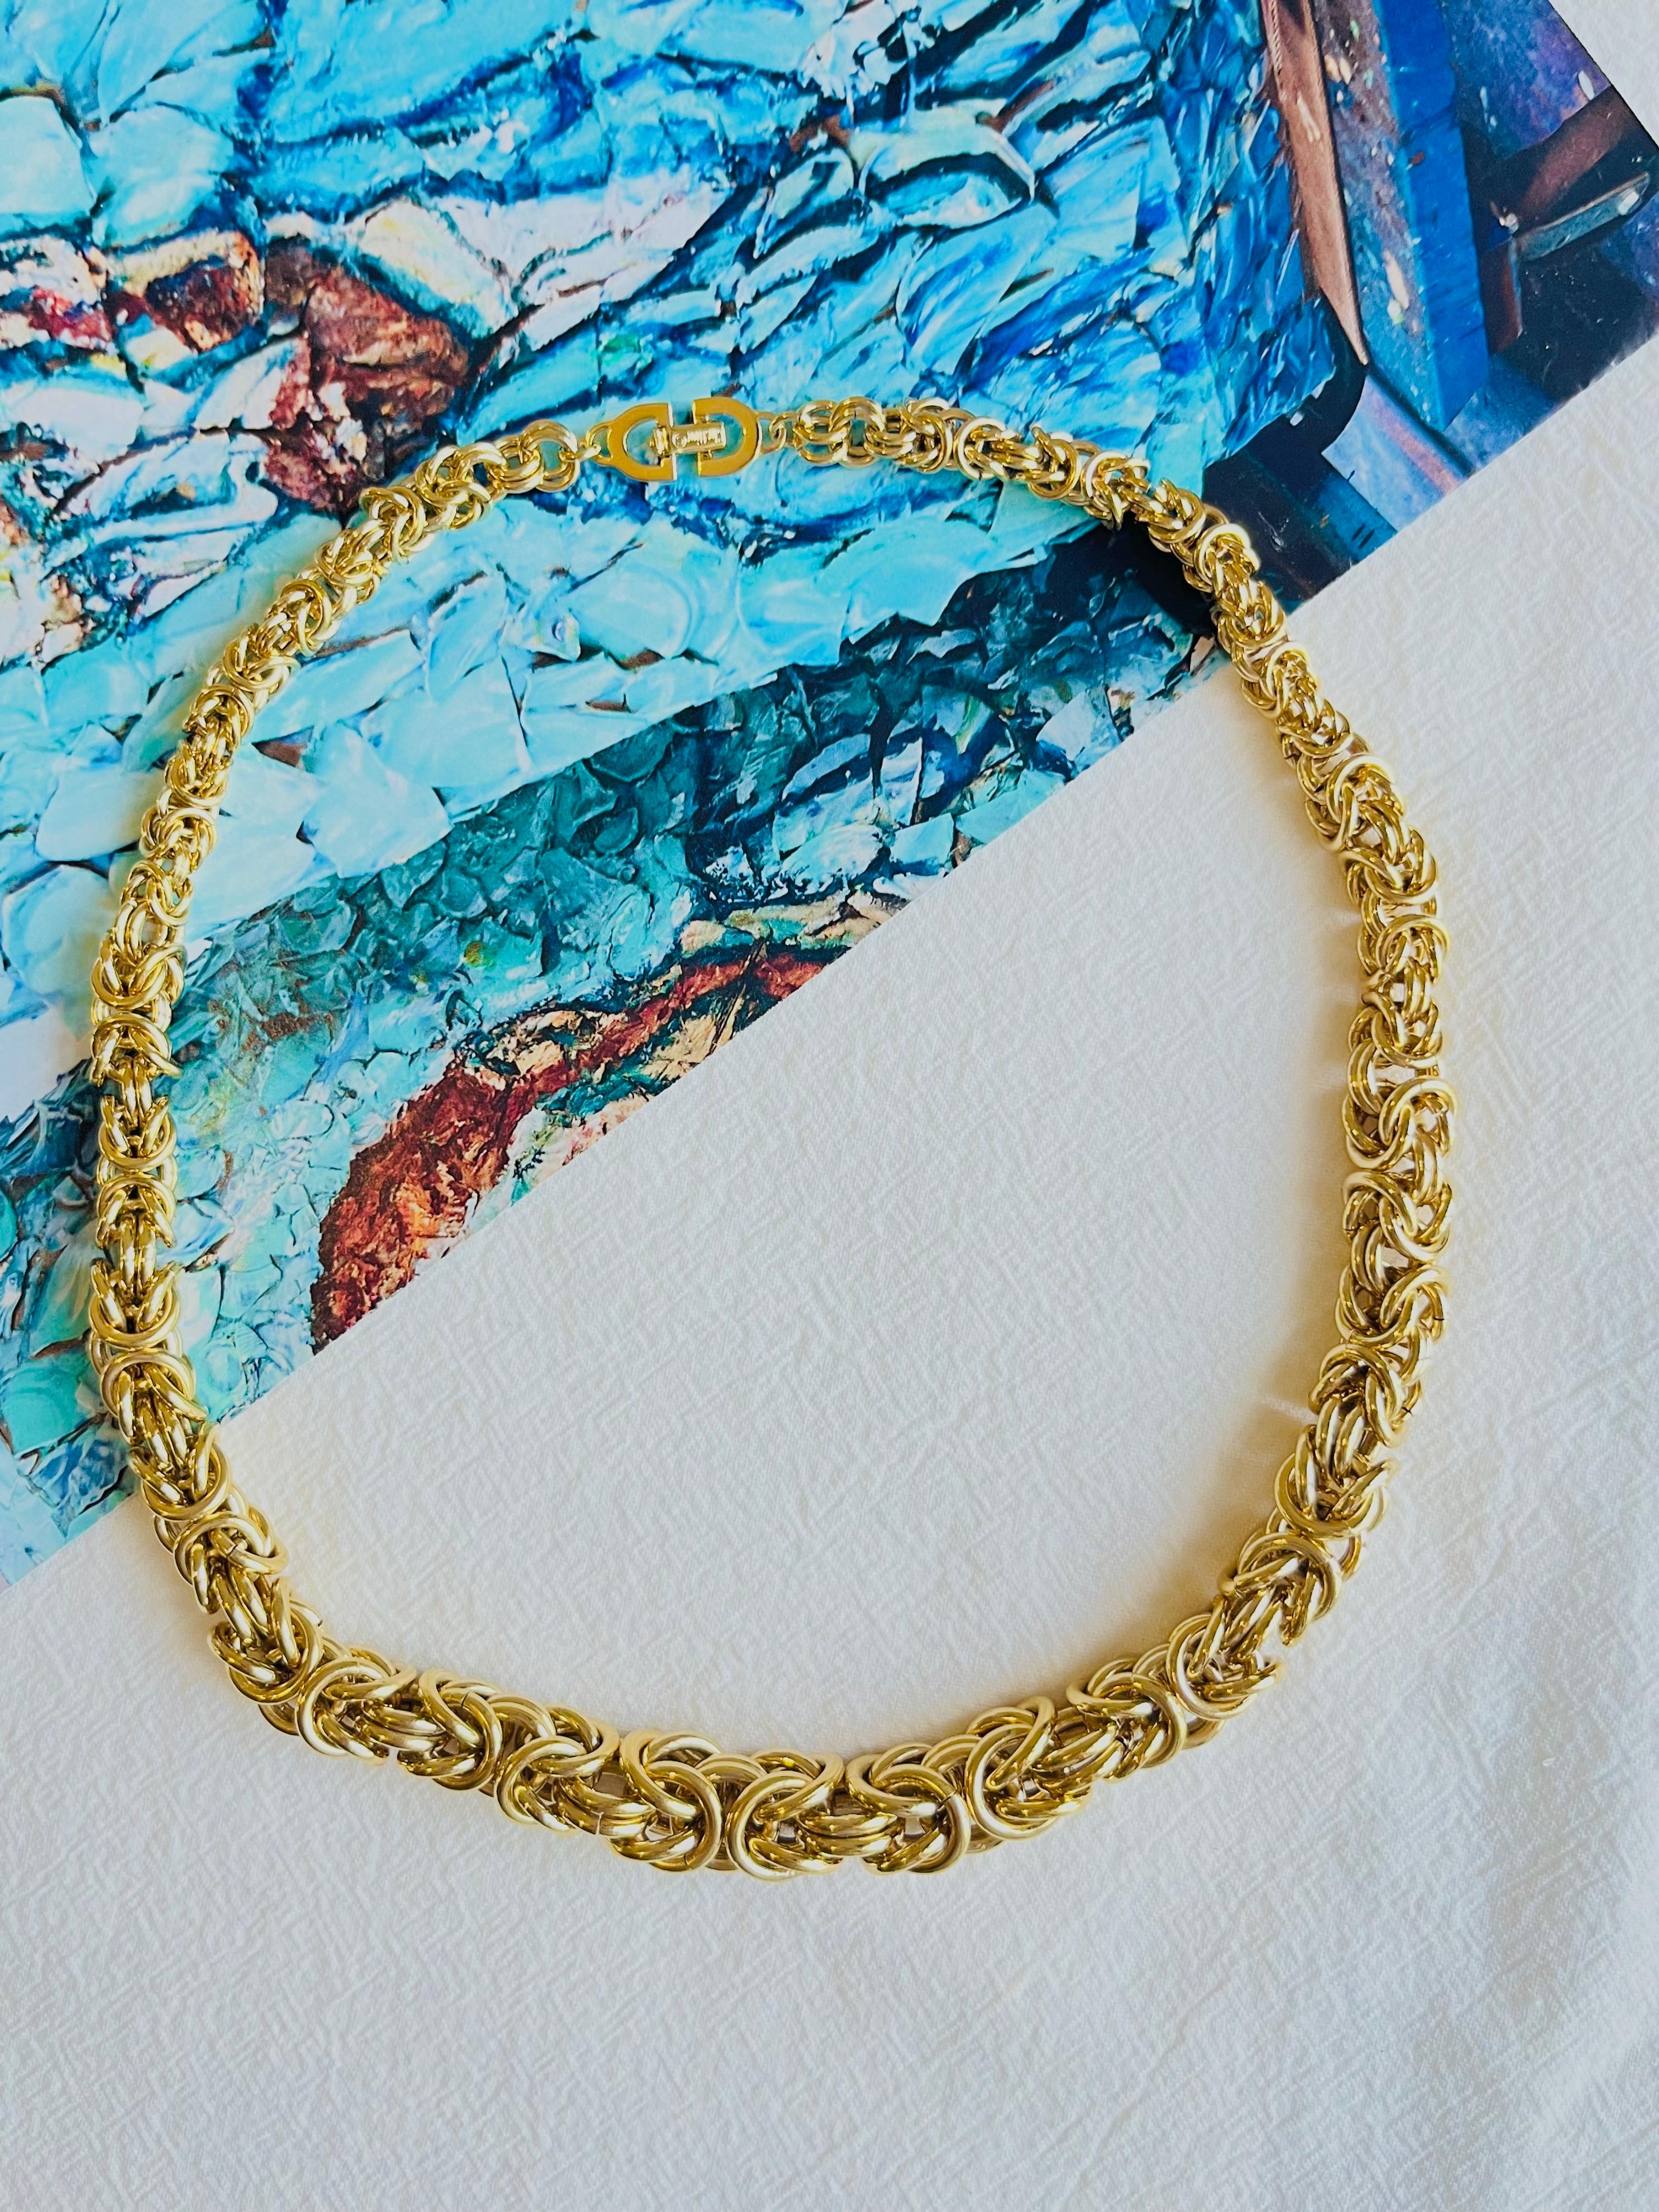 Christian Dior Vintage 1980s Byzantine Braid Royal Mesh Knot Link Rope Unisex Modernist Chunky Statement Necklace, Gold Plated

Very excellent condition. 100% Genuine. Rare to find.

The necklace is sure to make a statement. Its unique tapered